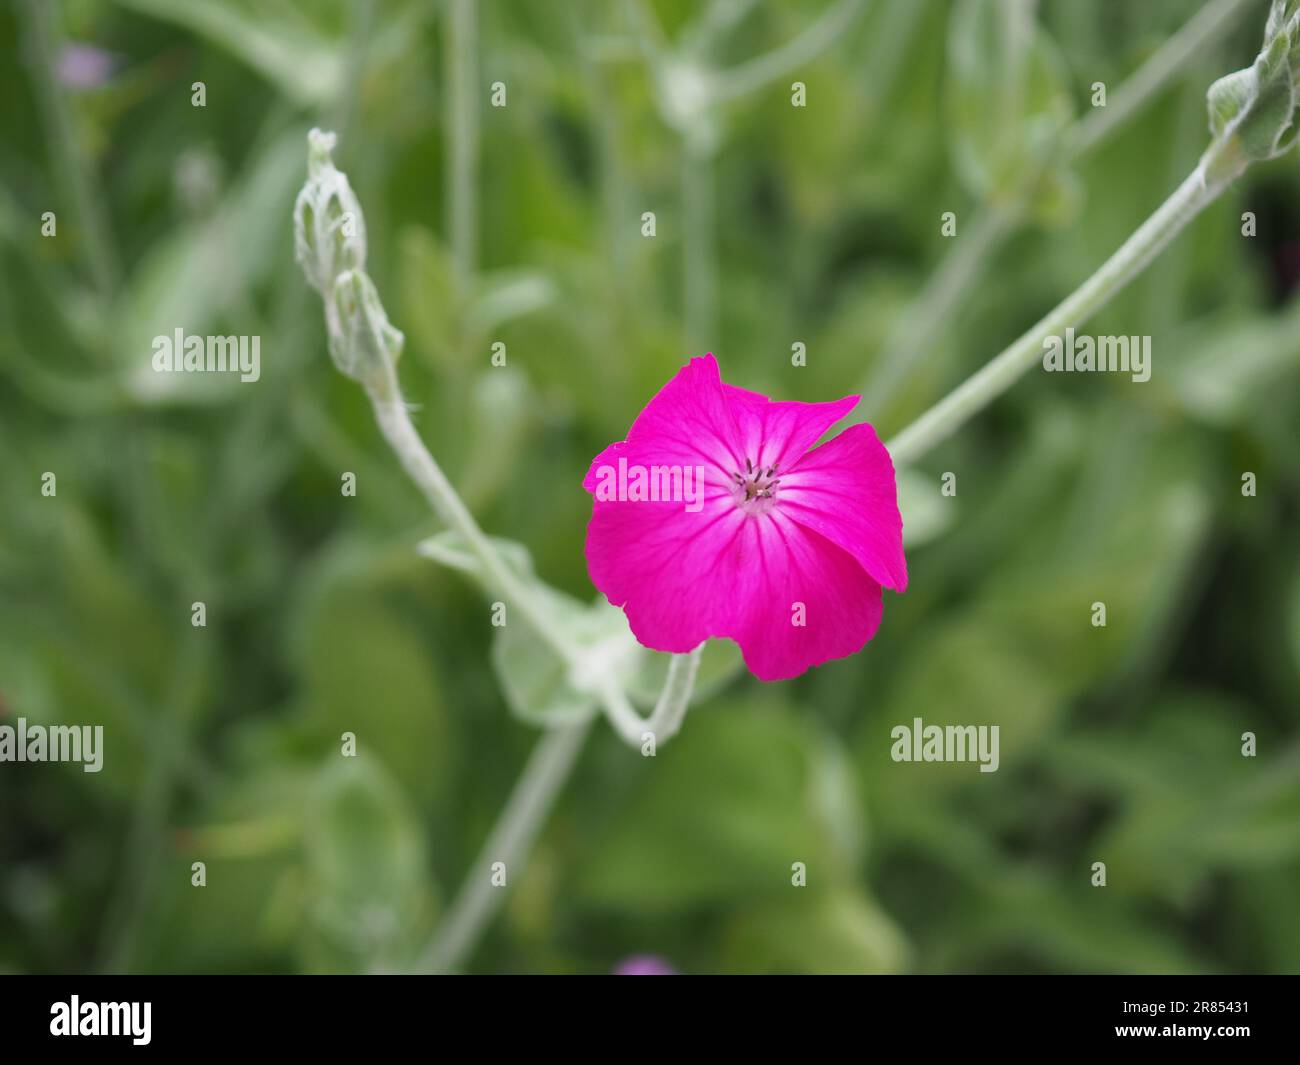 Close-up of a cottage garden rose campion (lychnis coronaria) flower in deep pink against a blurred grey/green background Stock Photo